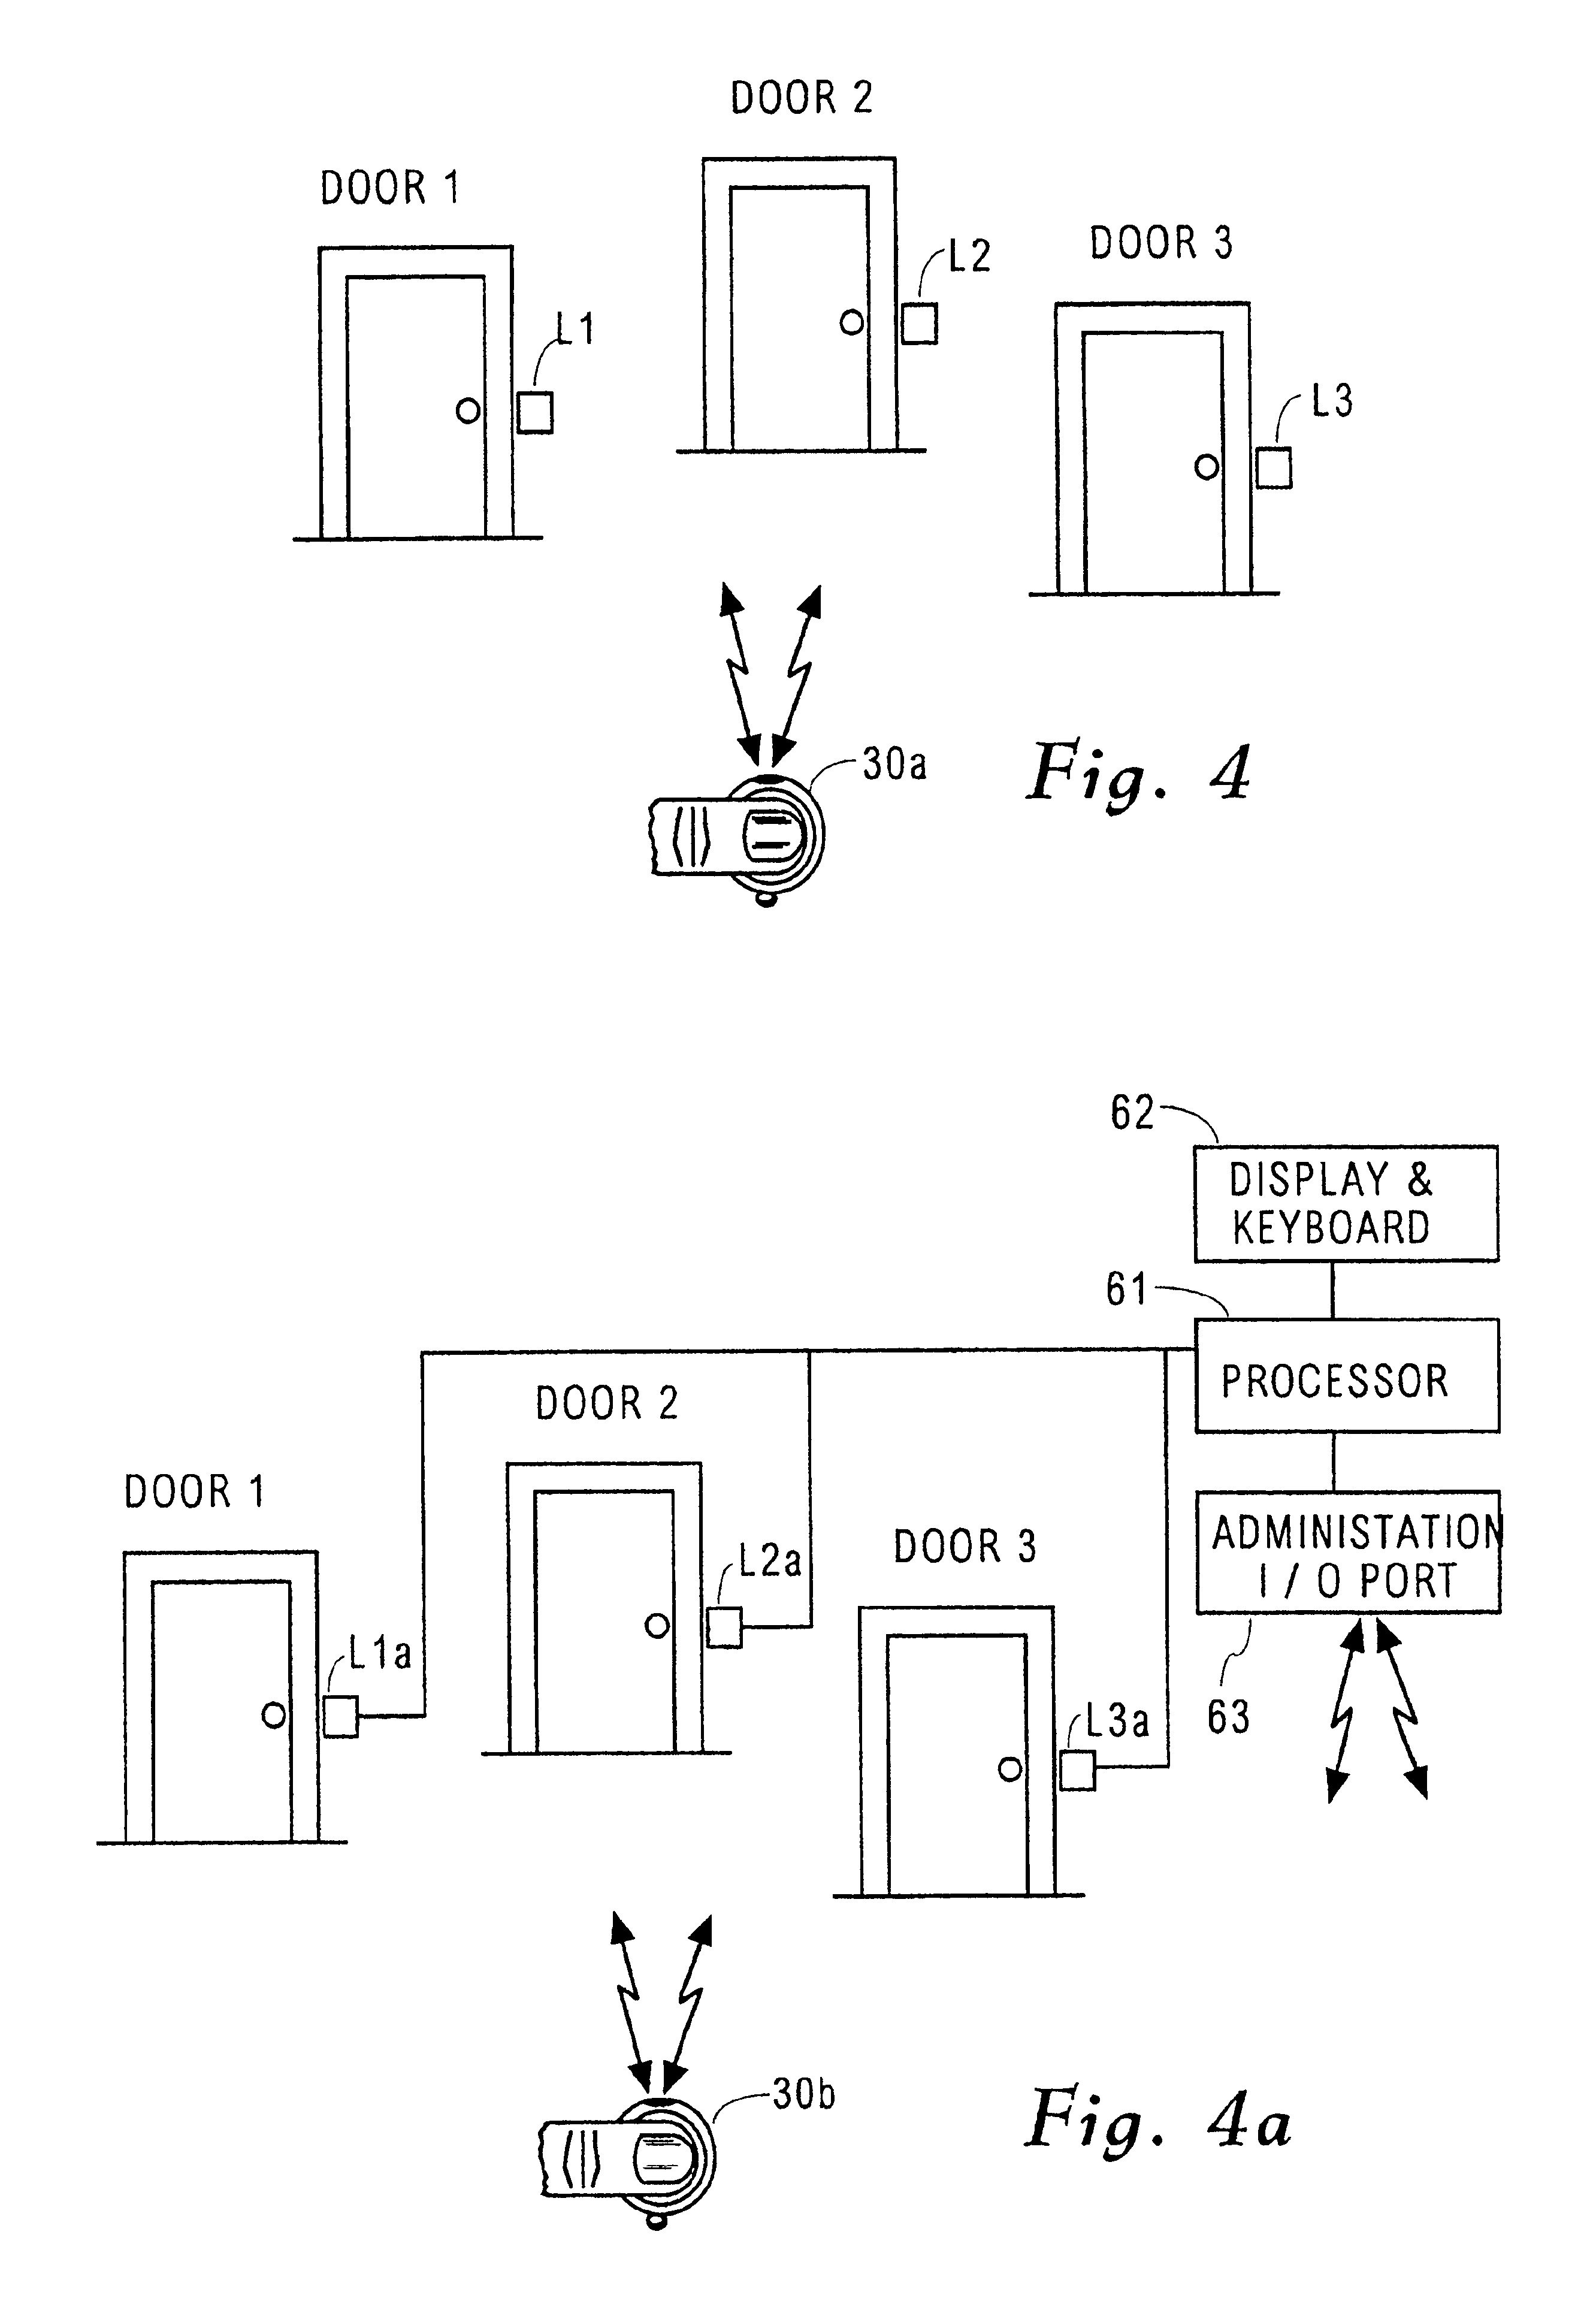 Security access method and apparatus